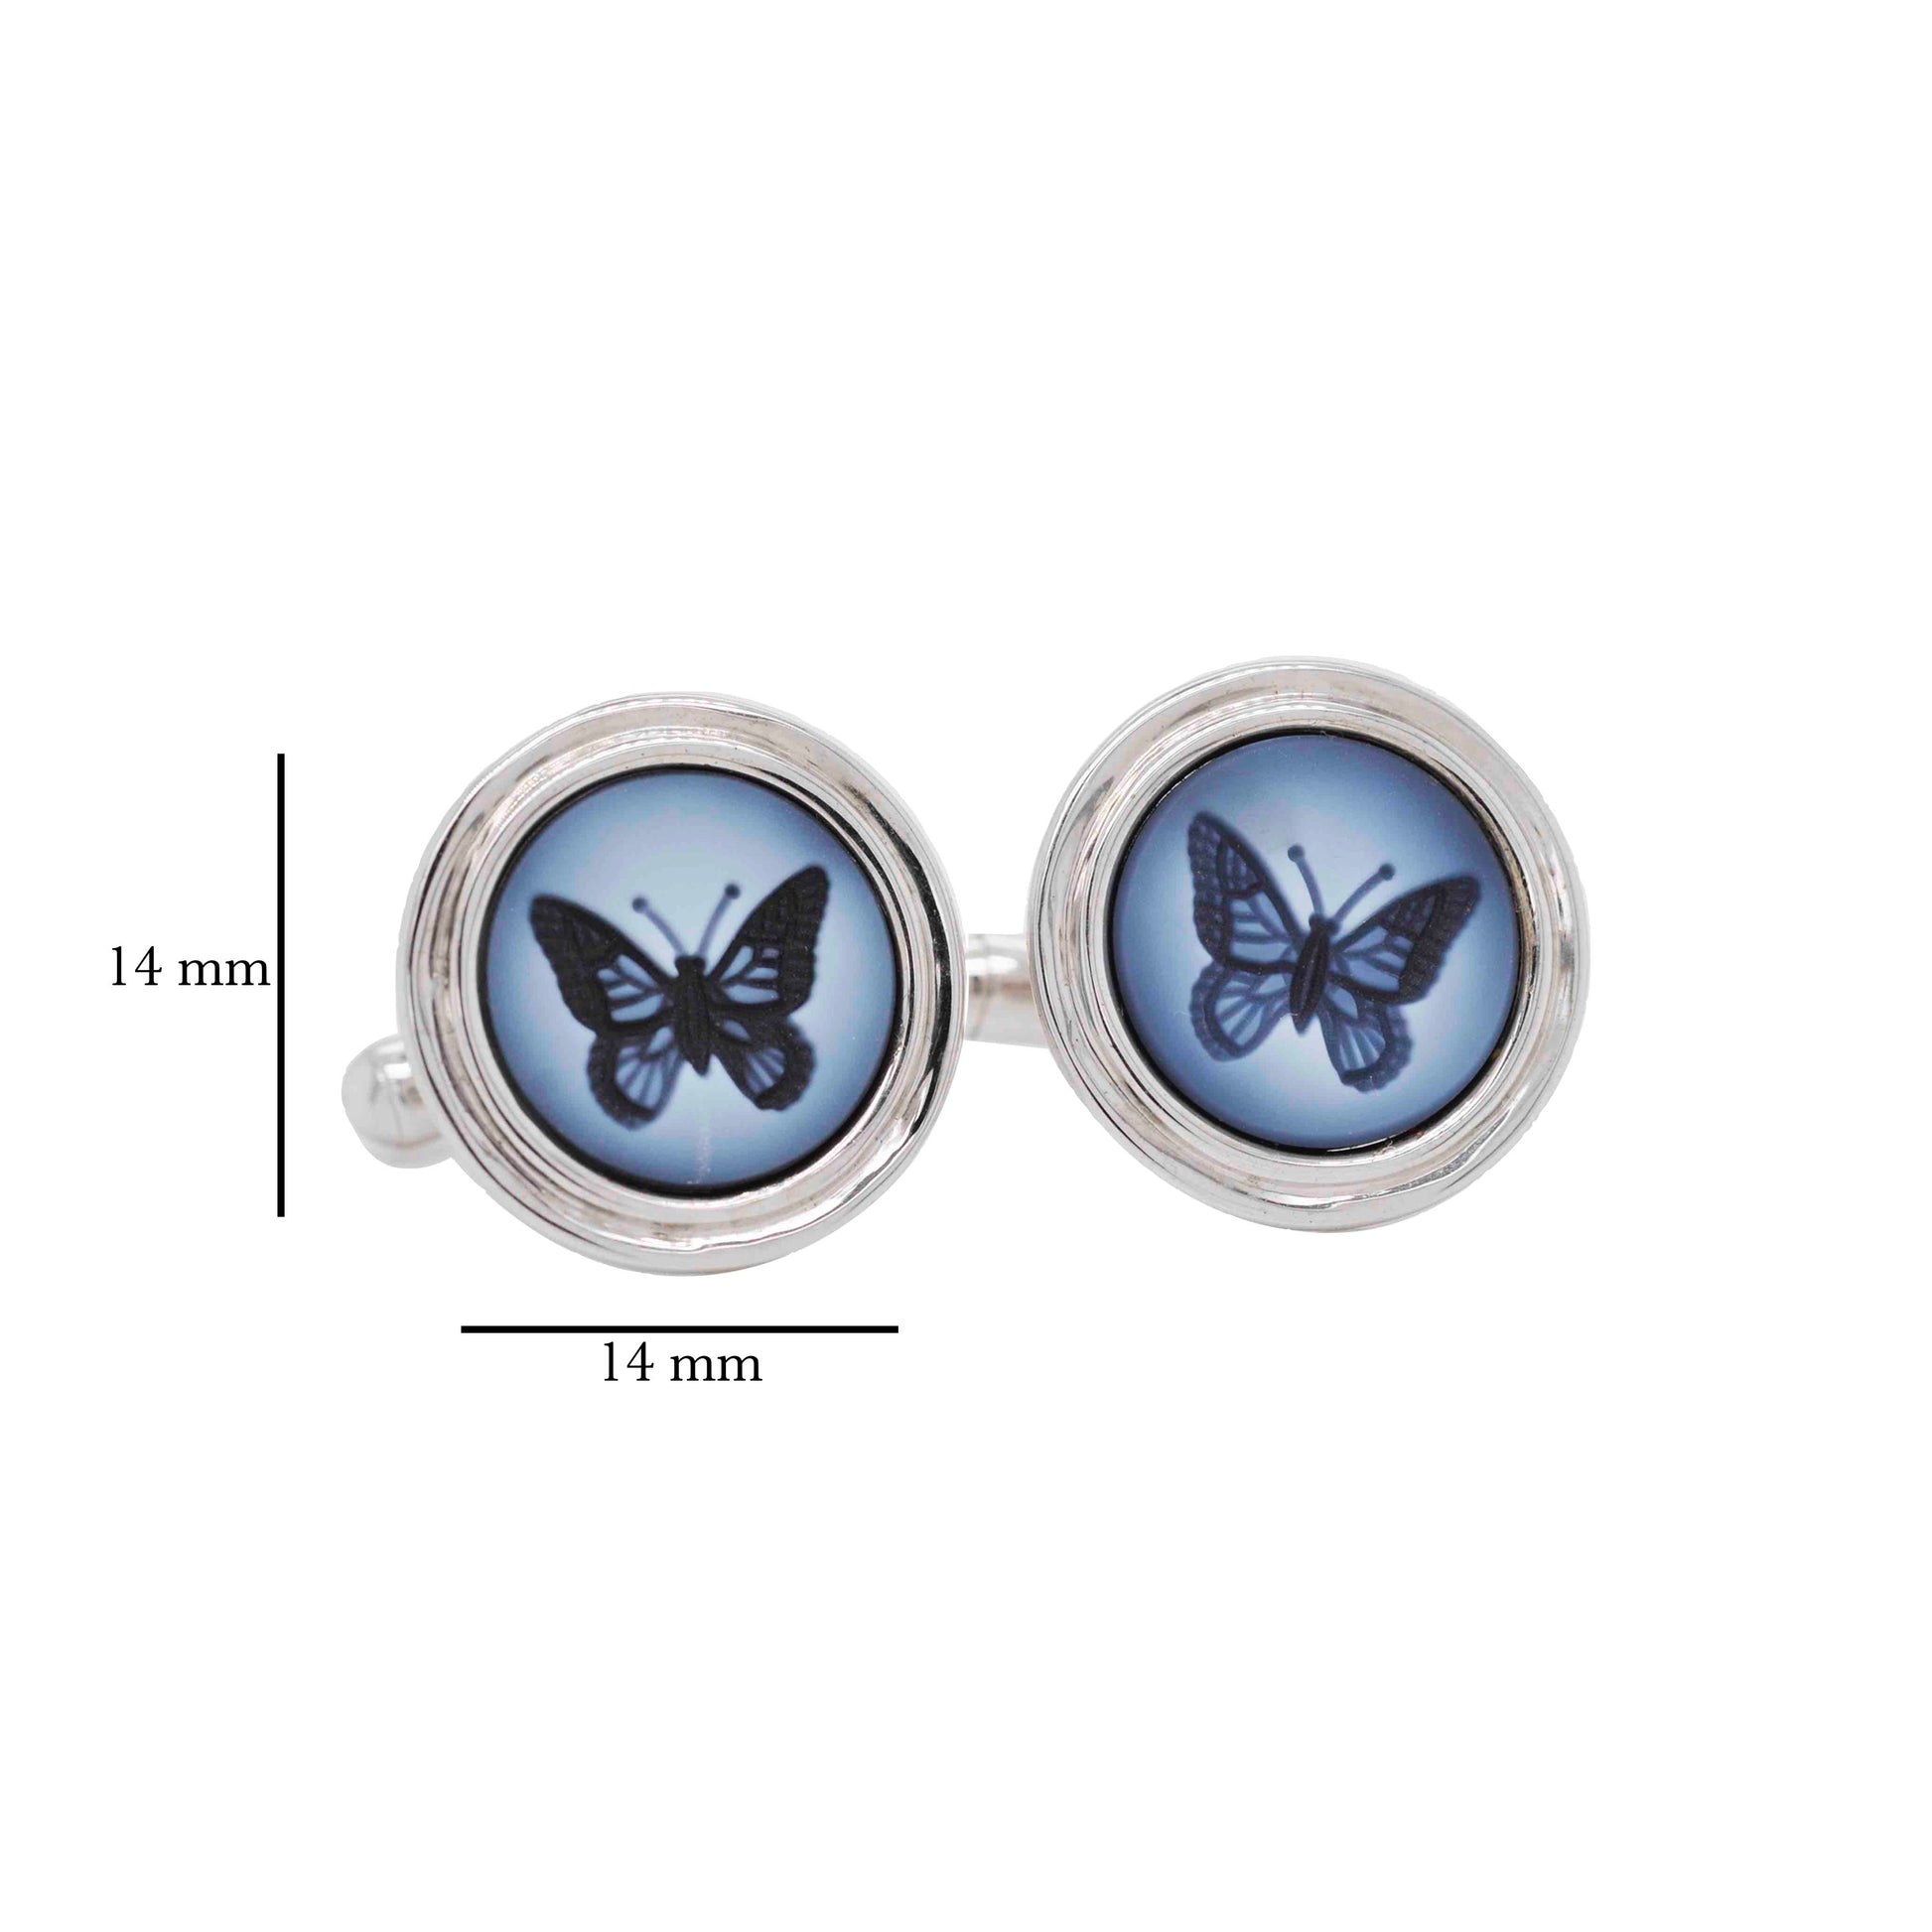 Hand-Carved Butterfly Agate Cameo Cufflinks - Vaibhav Dhadda Jewelry